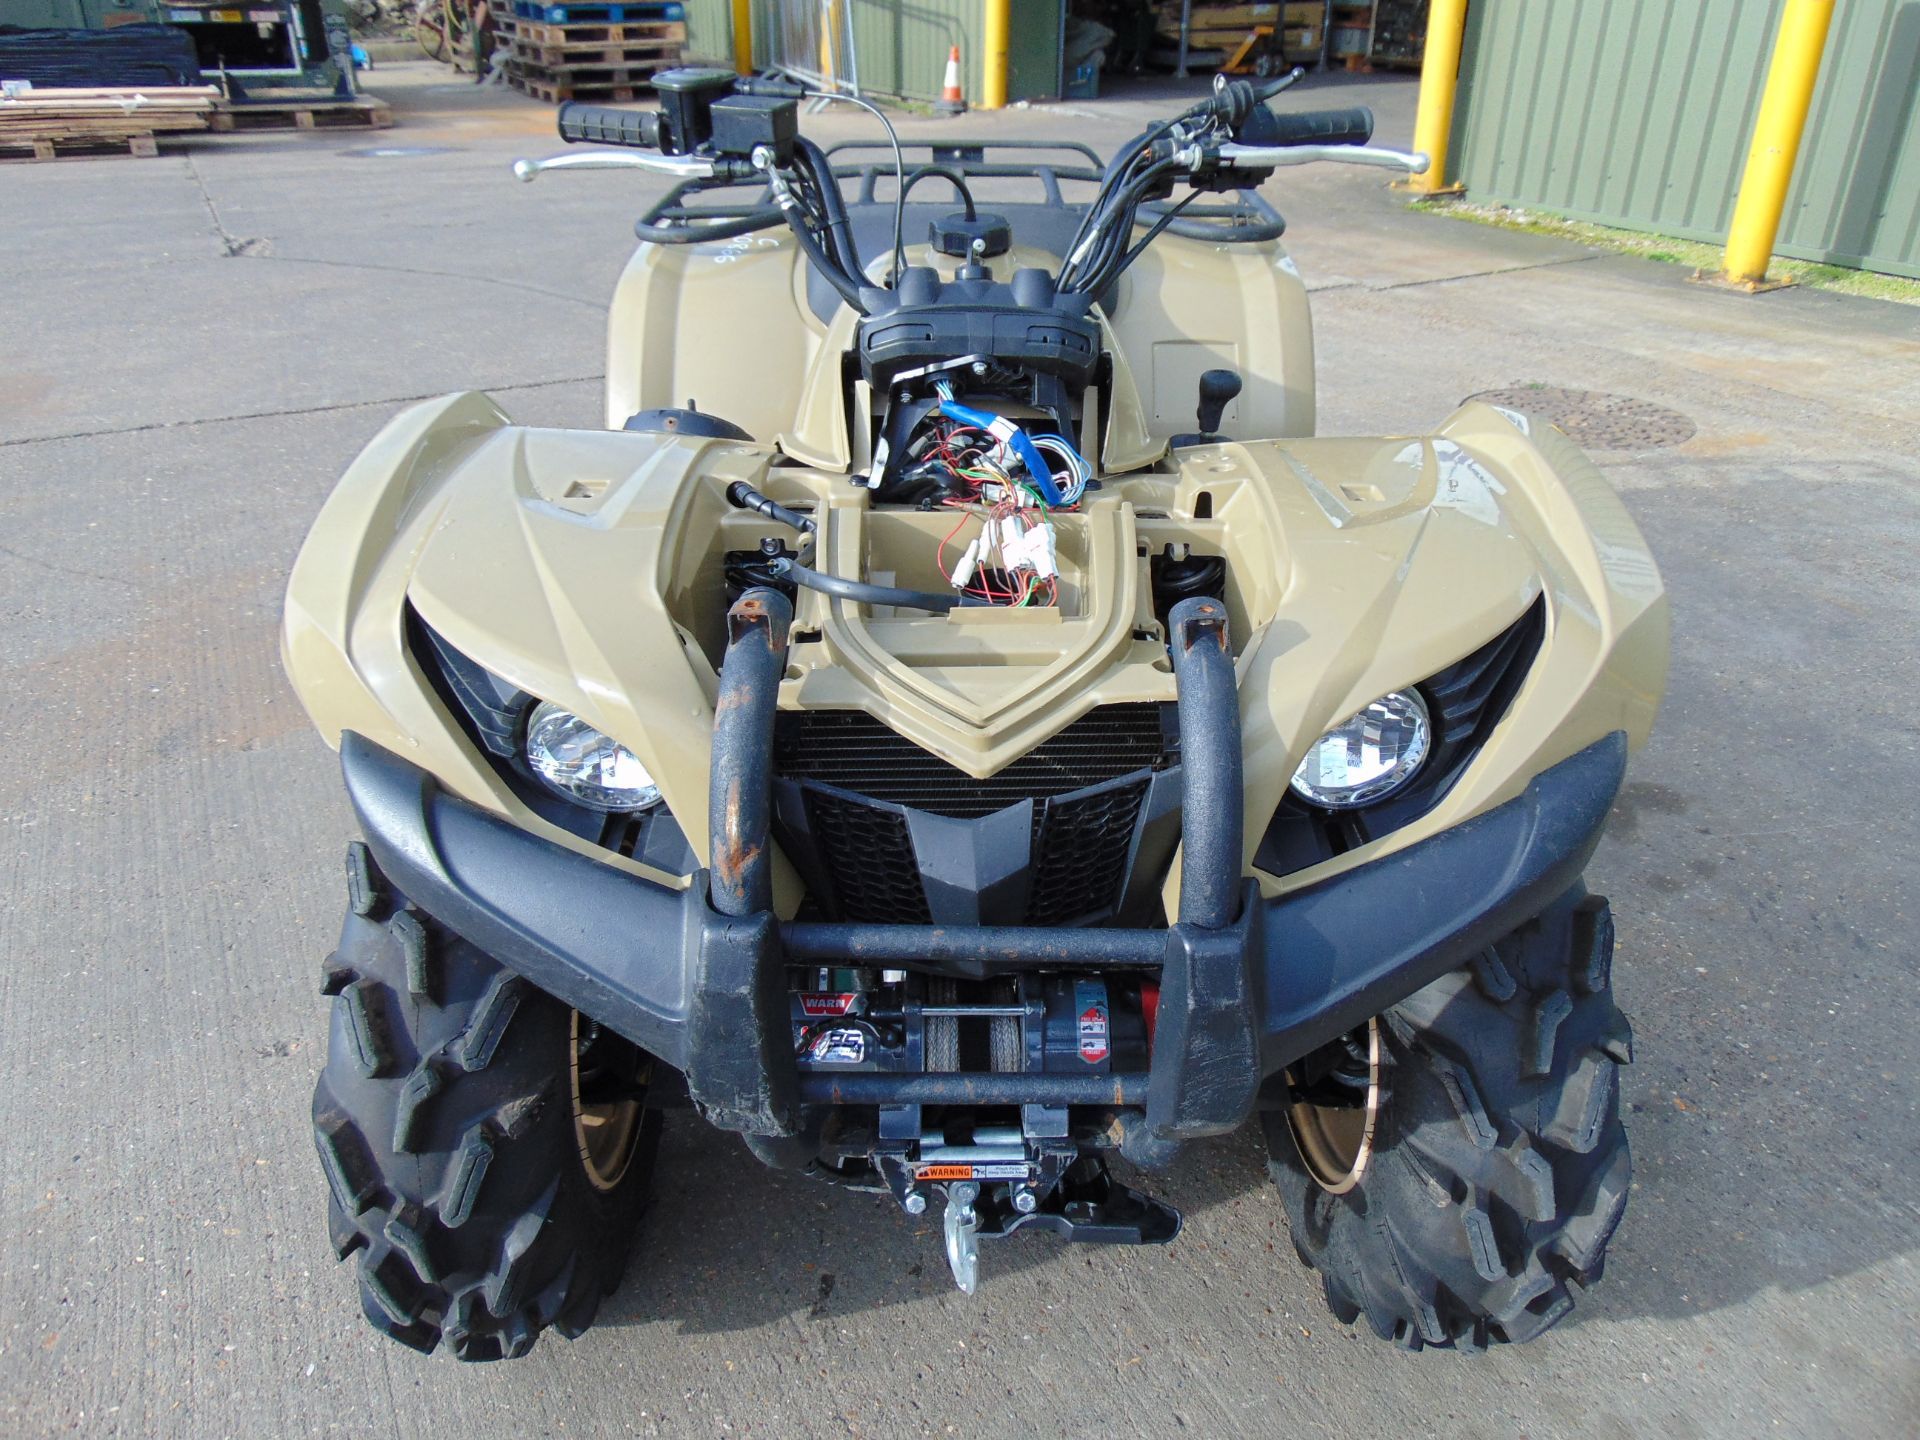 Recent Release Military Specification Yamaha Grizzly 450 4 x 4 ATV Quad Bike ONLY 75 Miles!!! - Image 3 of 24